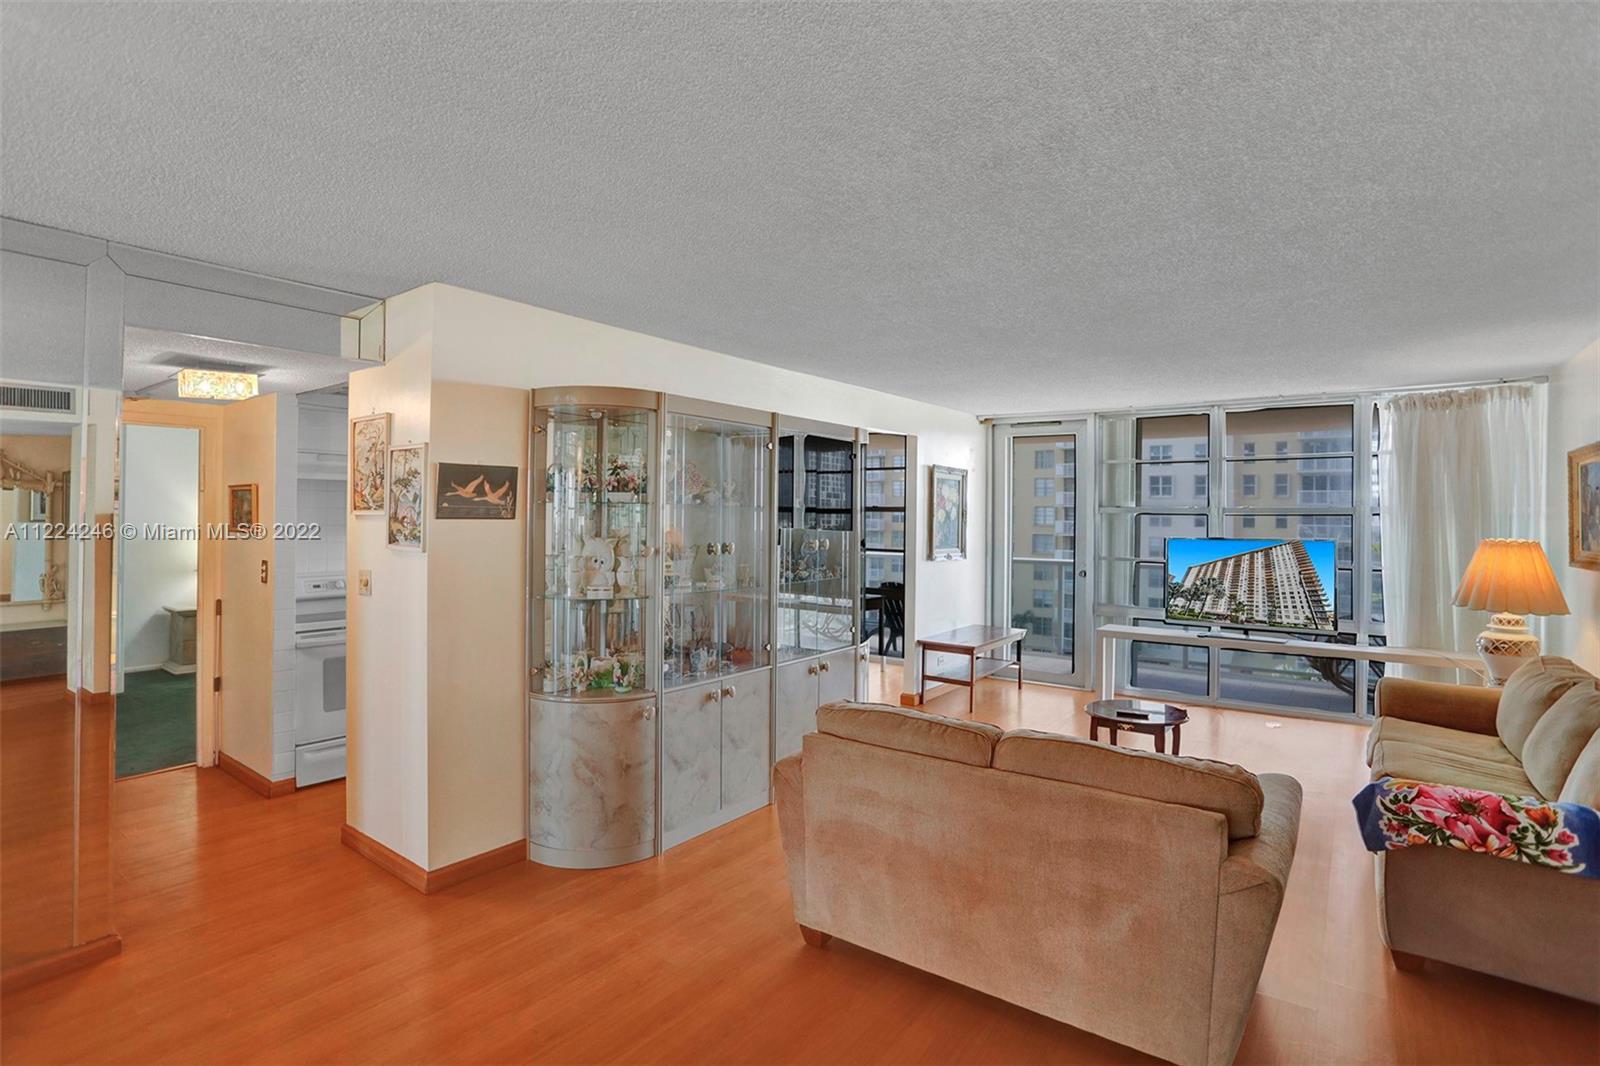 Excellent location in desirable Sunny Isles Beach. Large two-bedroom, two baths apartment with beaut